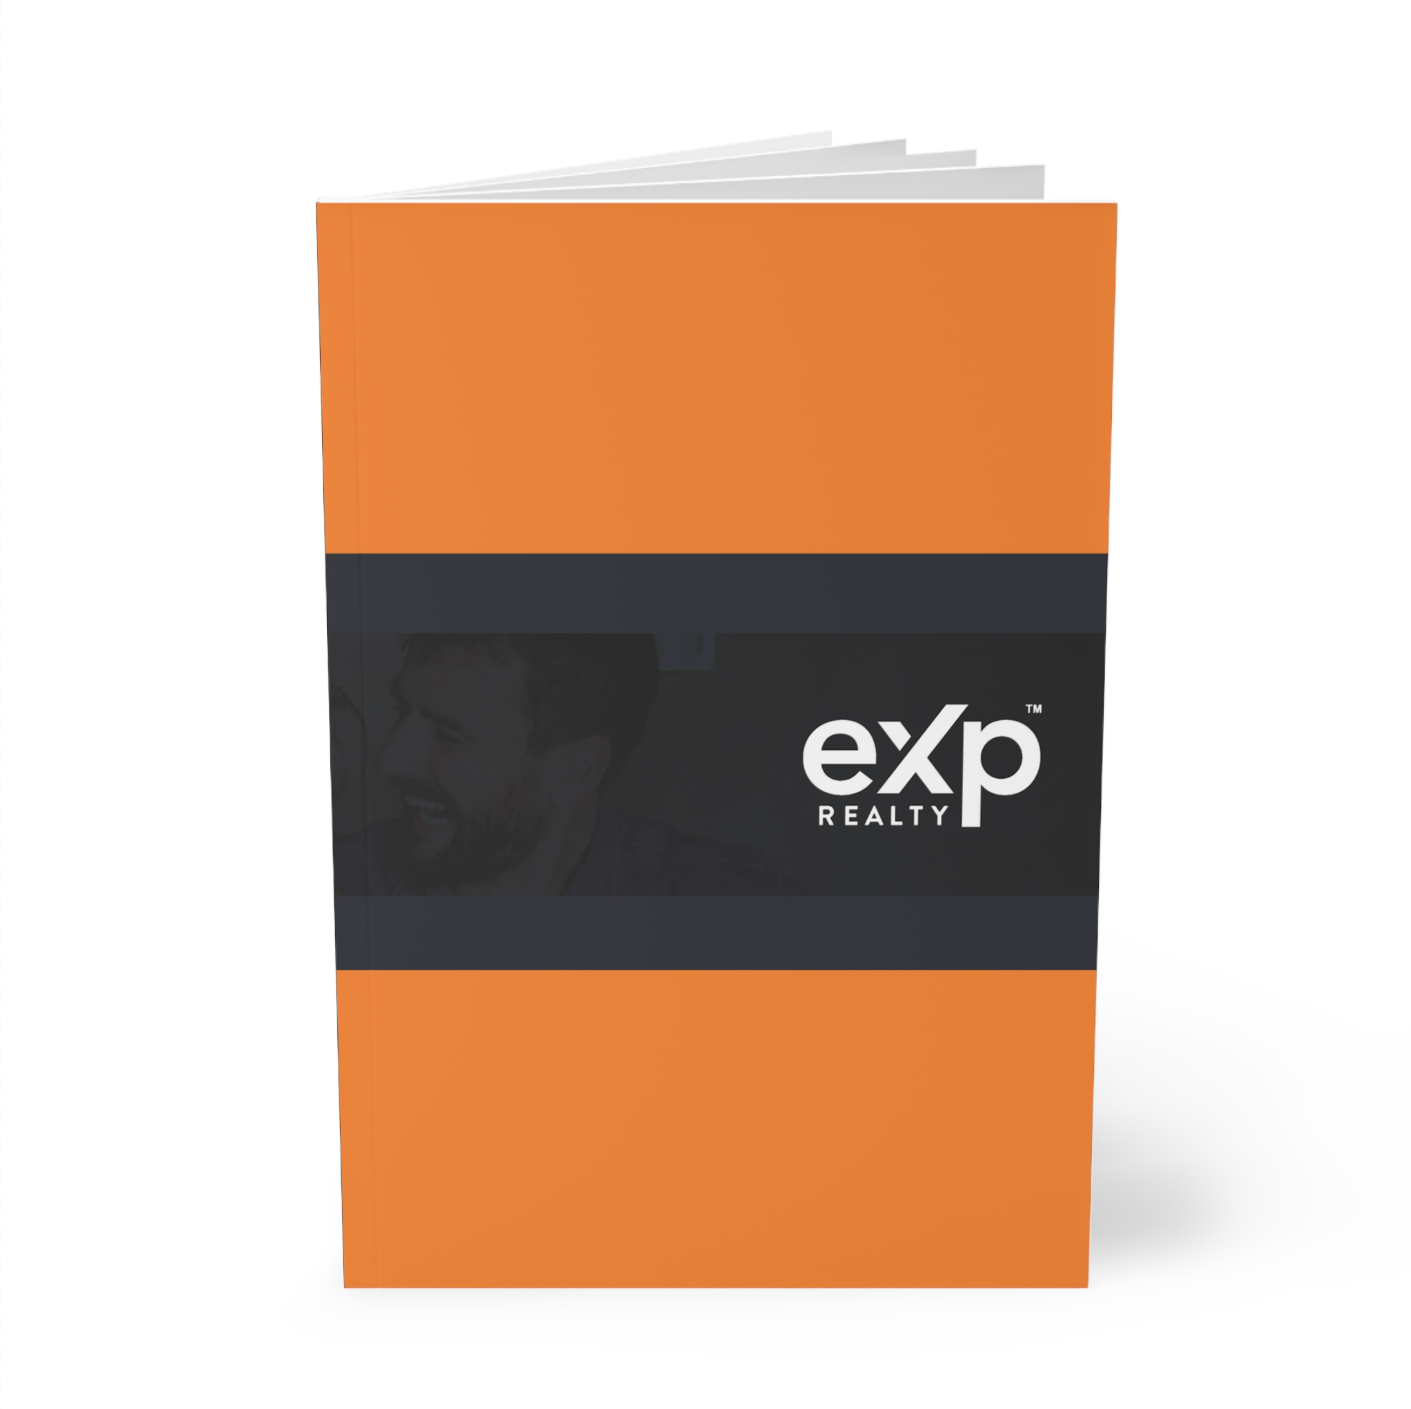 eXp Full Color SoftCover Binders Orange Opaque xx (from as low as $6.18 per cover)